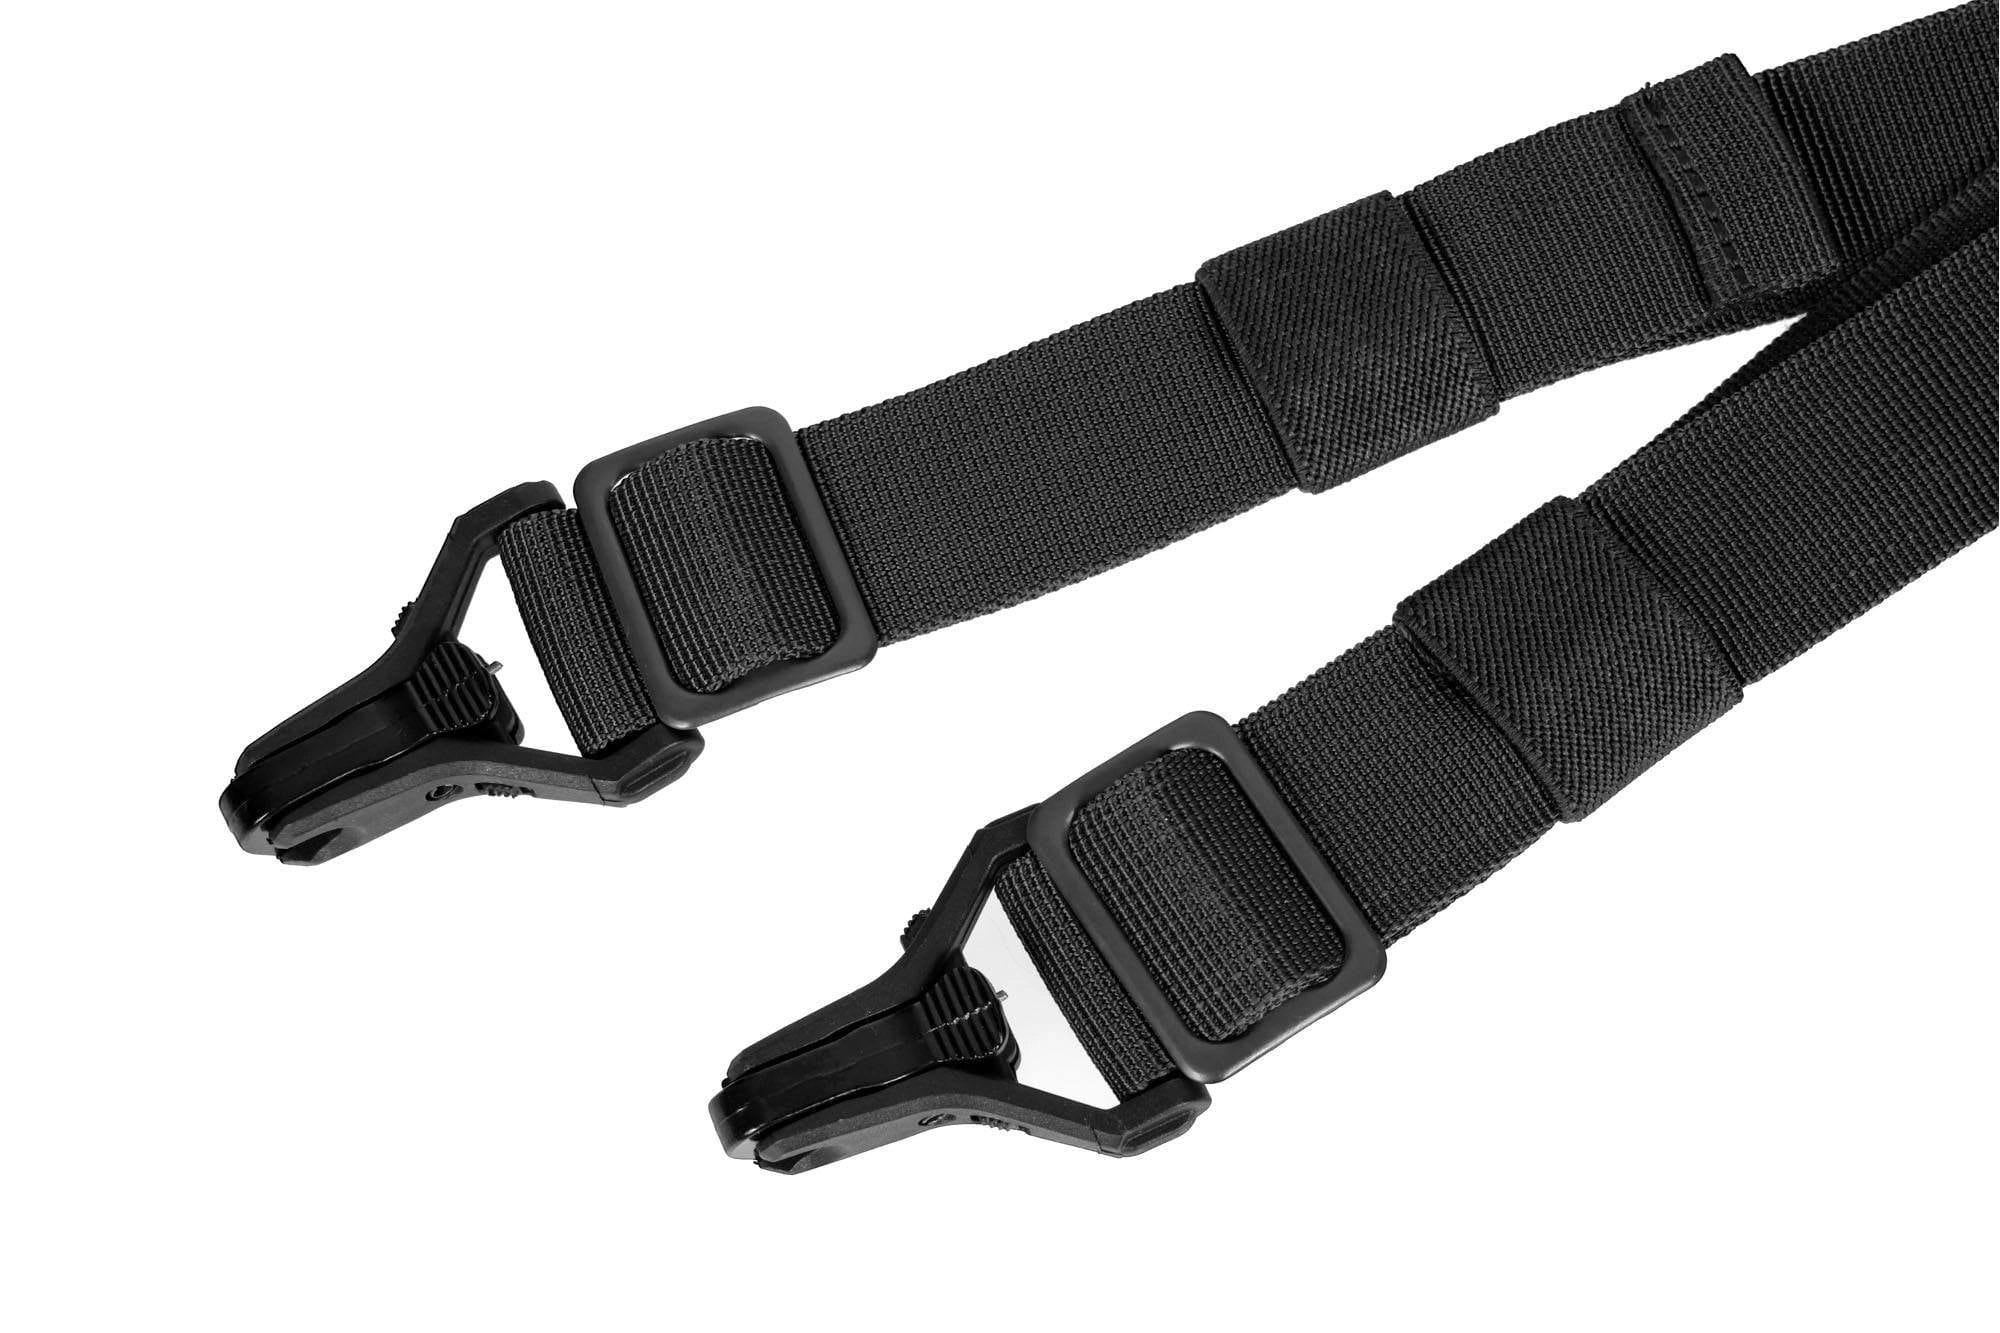 4-point LH tactical harness - black